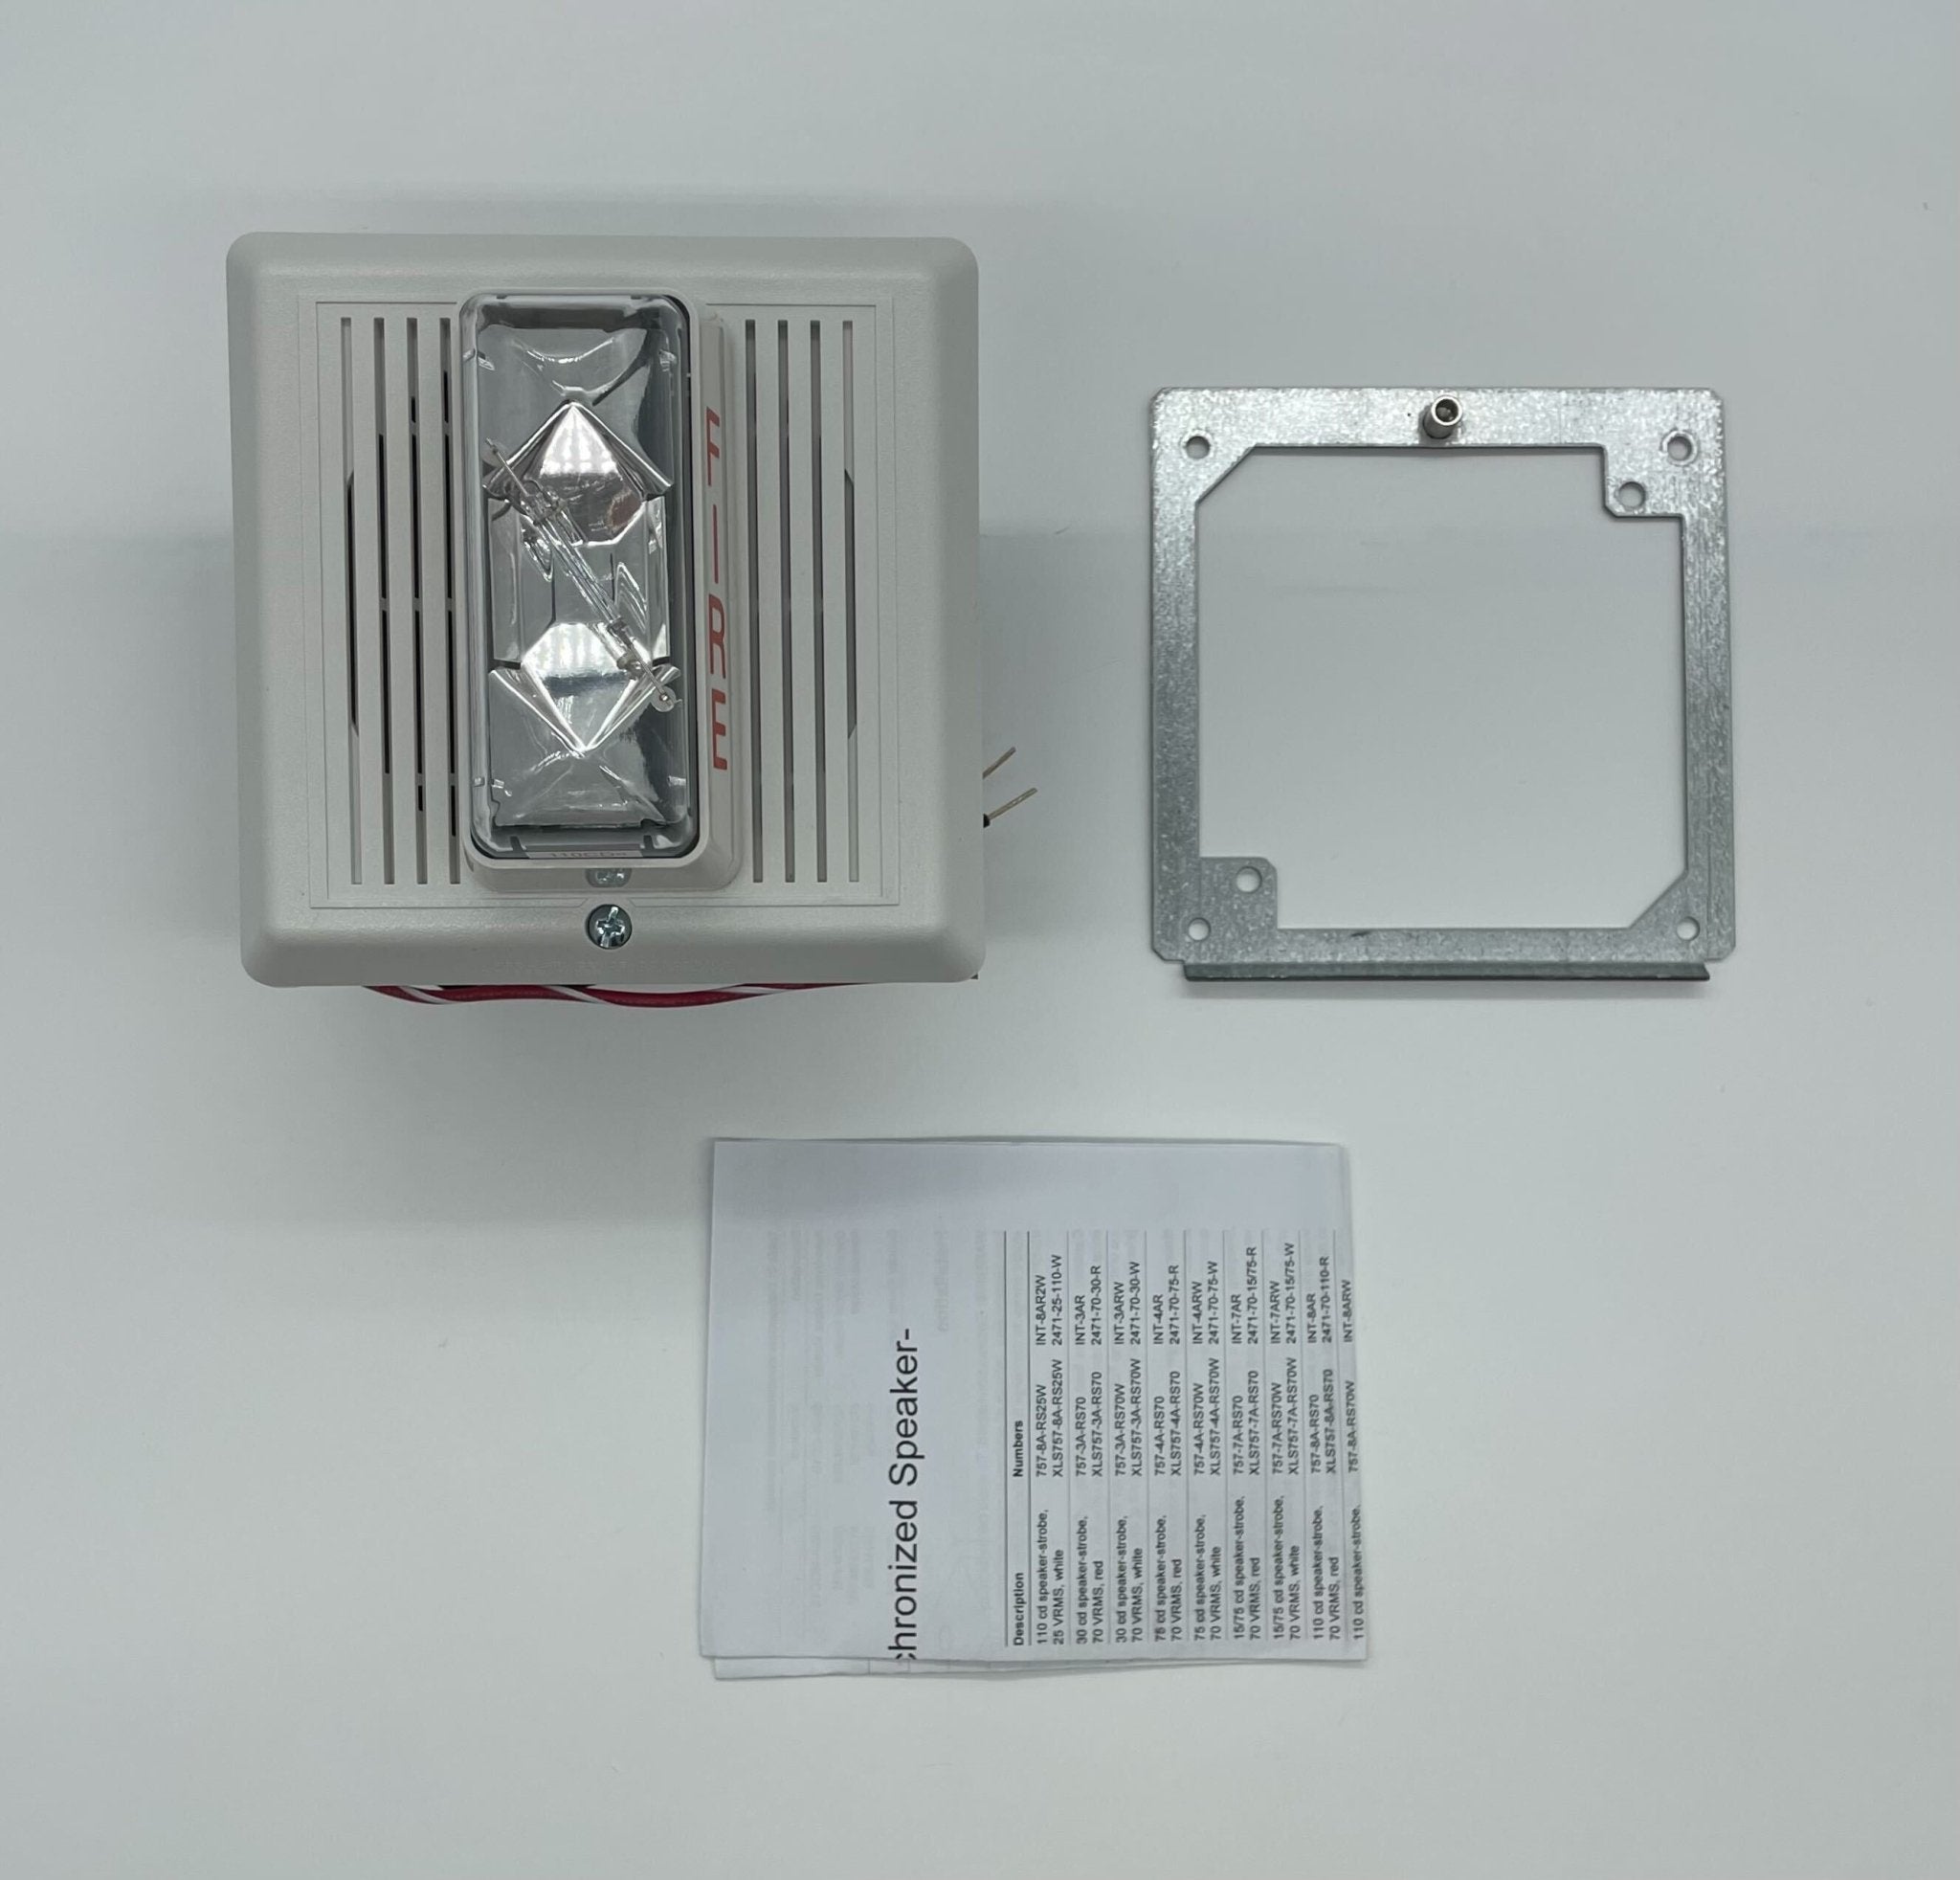 Edwards 757-8A-RS70W - The Fire Alarm Supplier